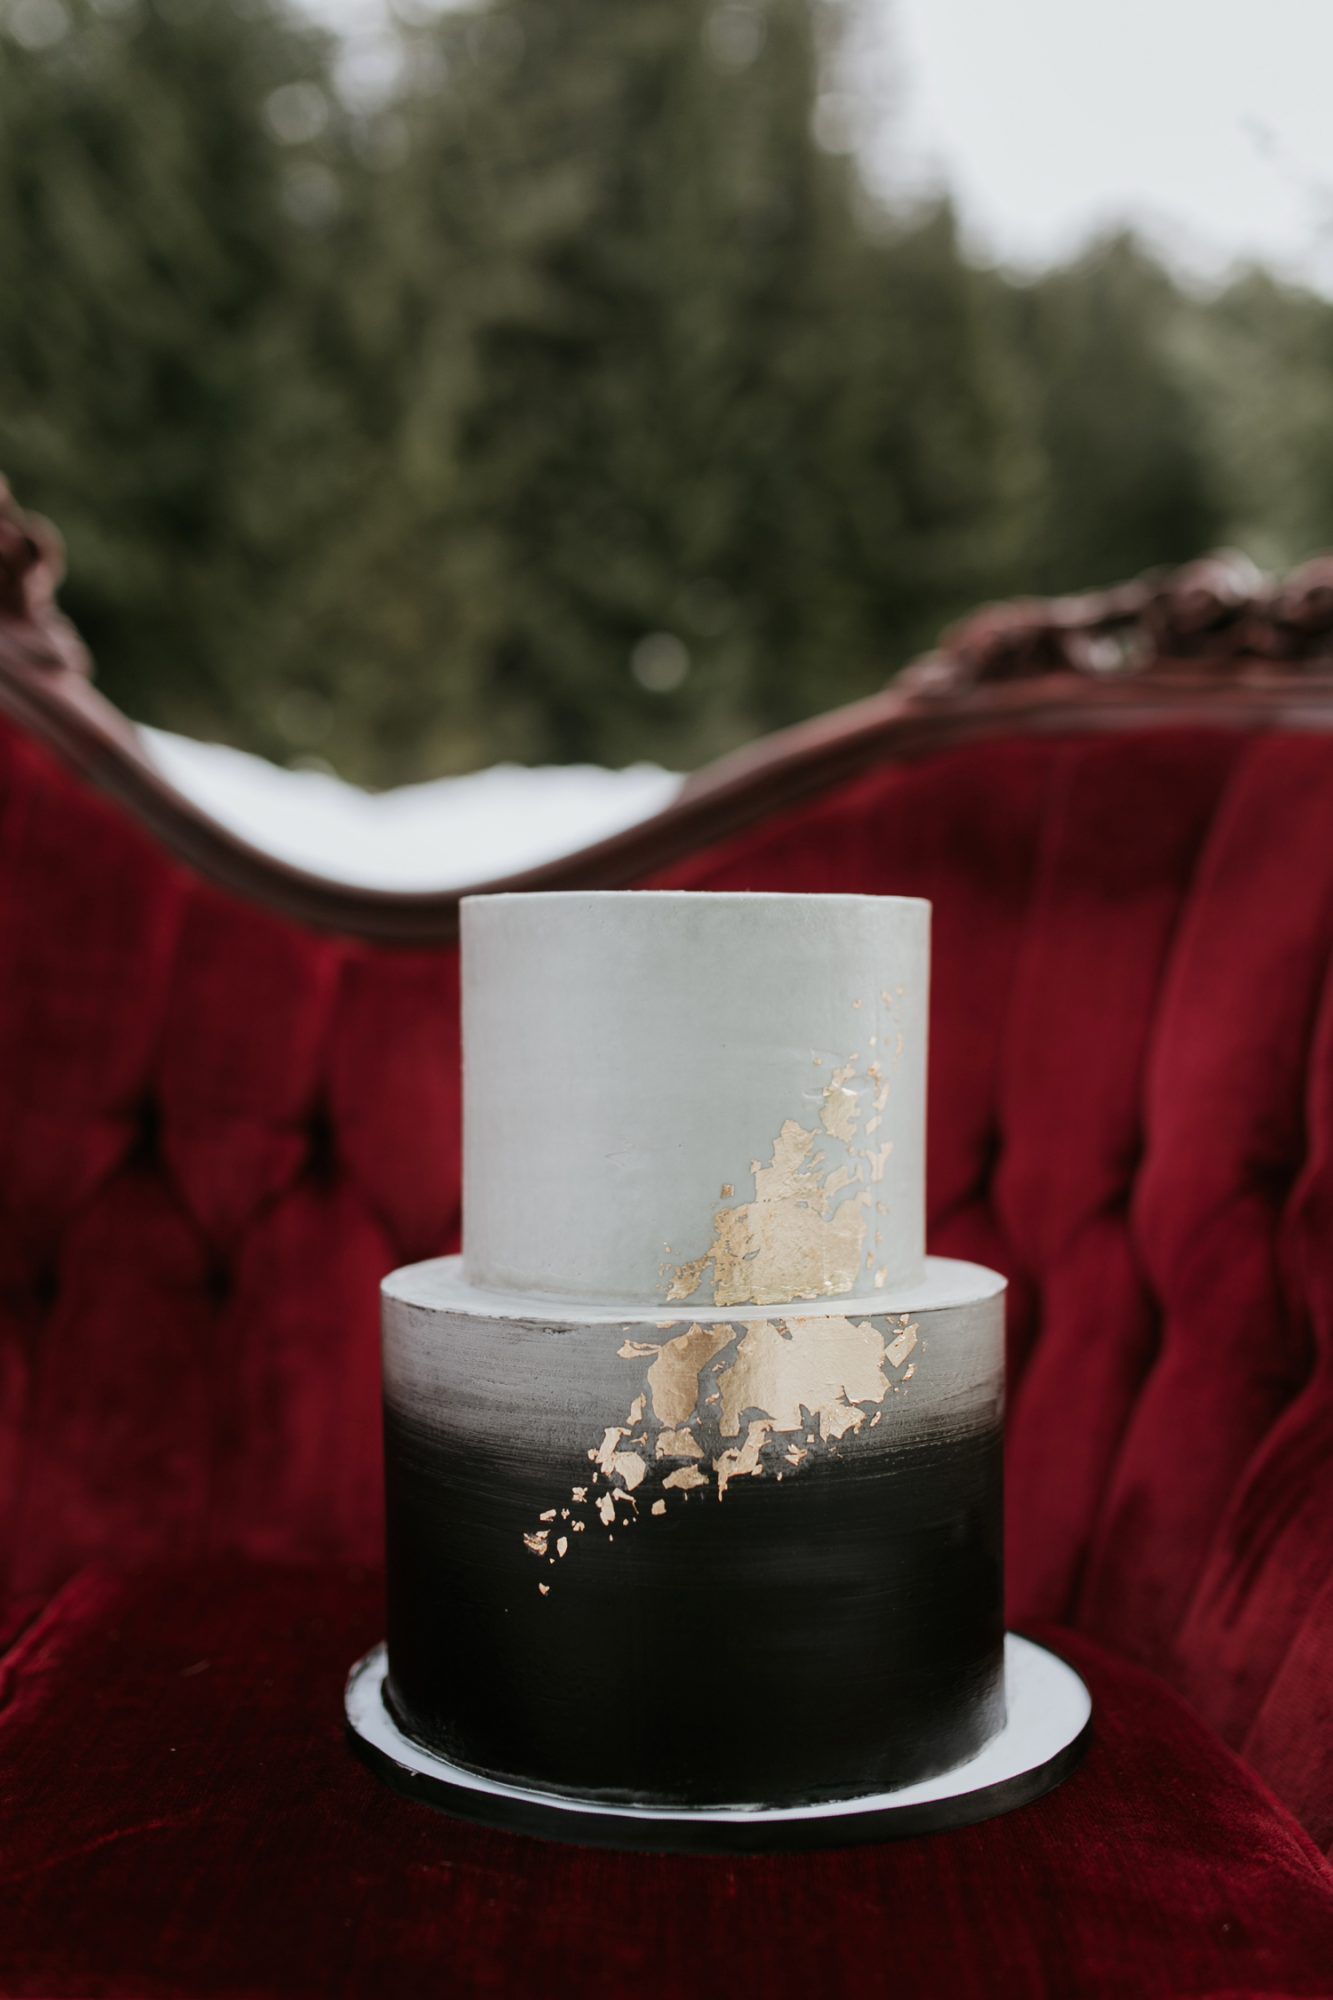 Winter Wedding Cake with Gold Foil